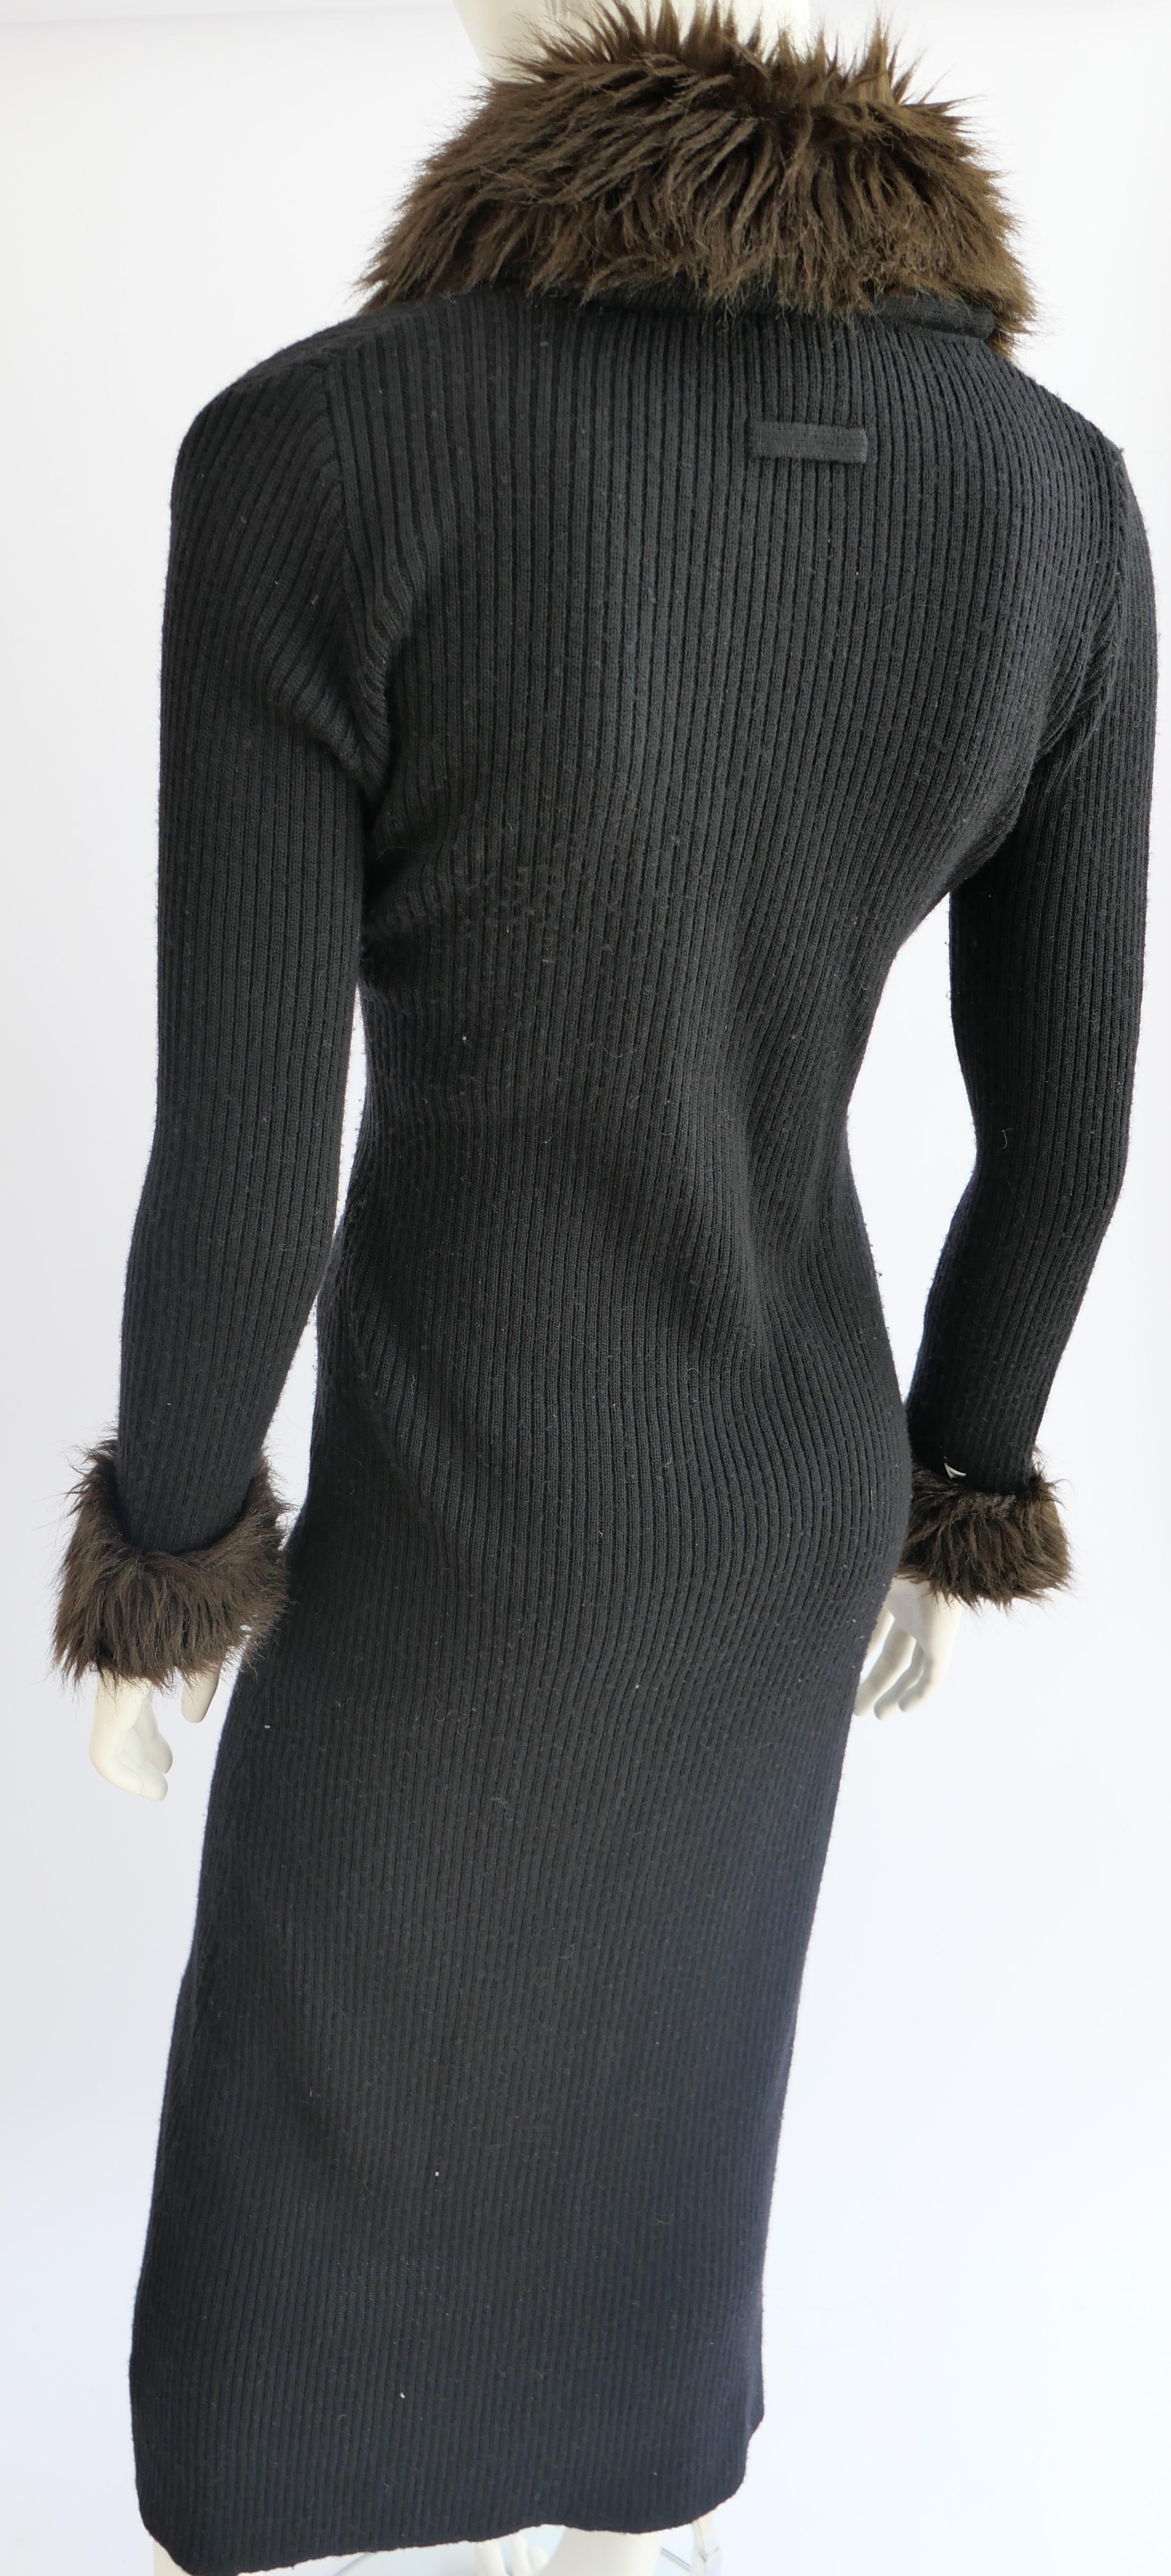 Black JEAN PAUL Gaultier Long Cardigan With Fur Trim Collar and Cuffs For Sale